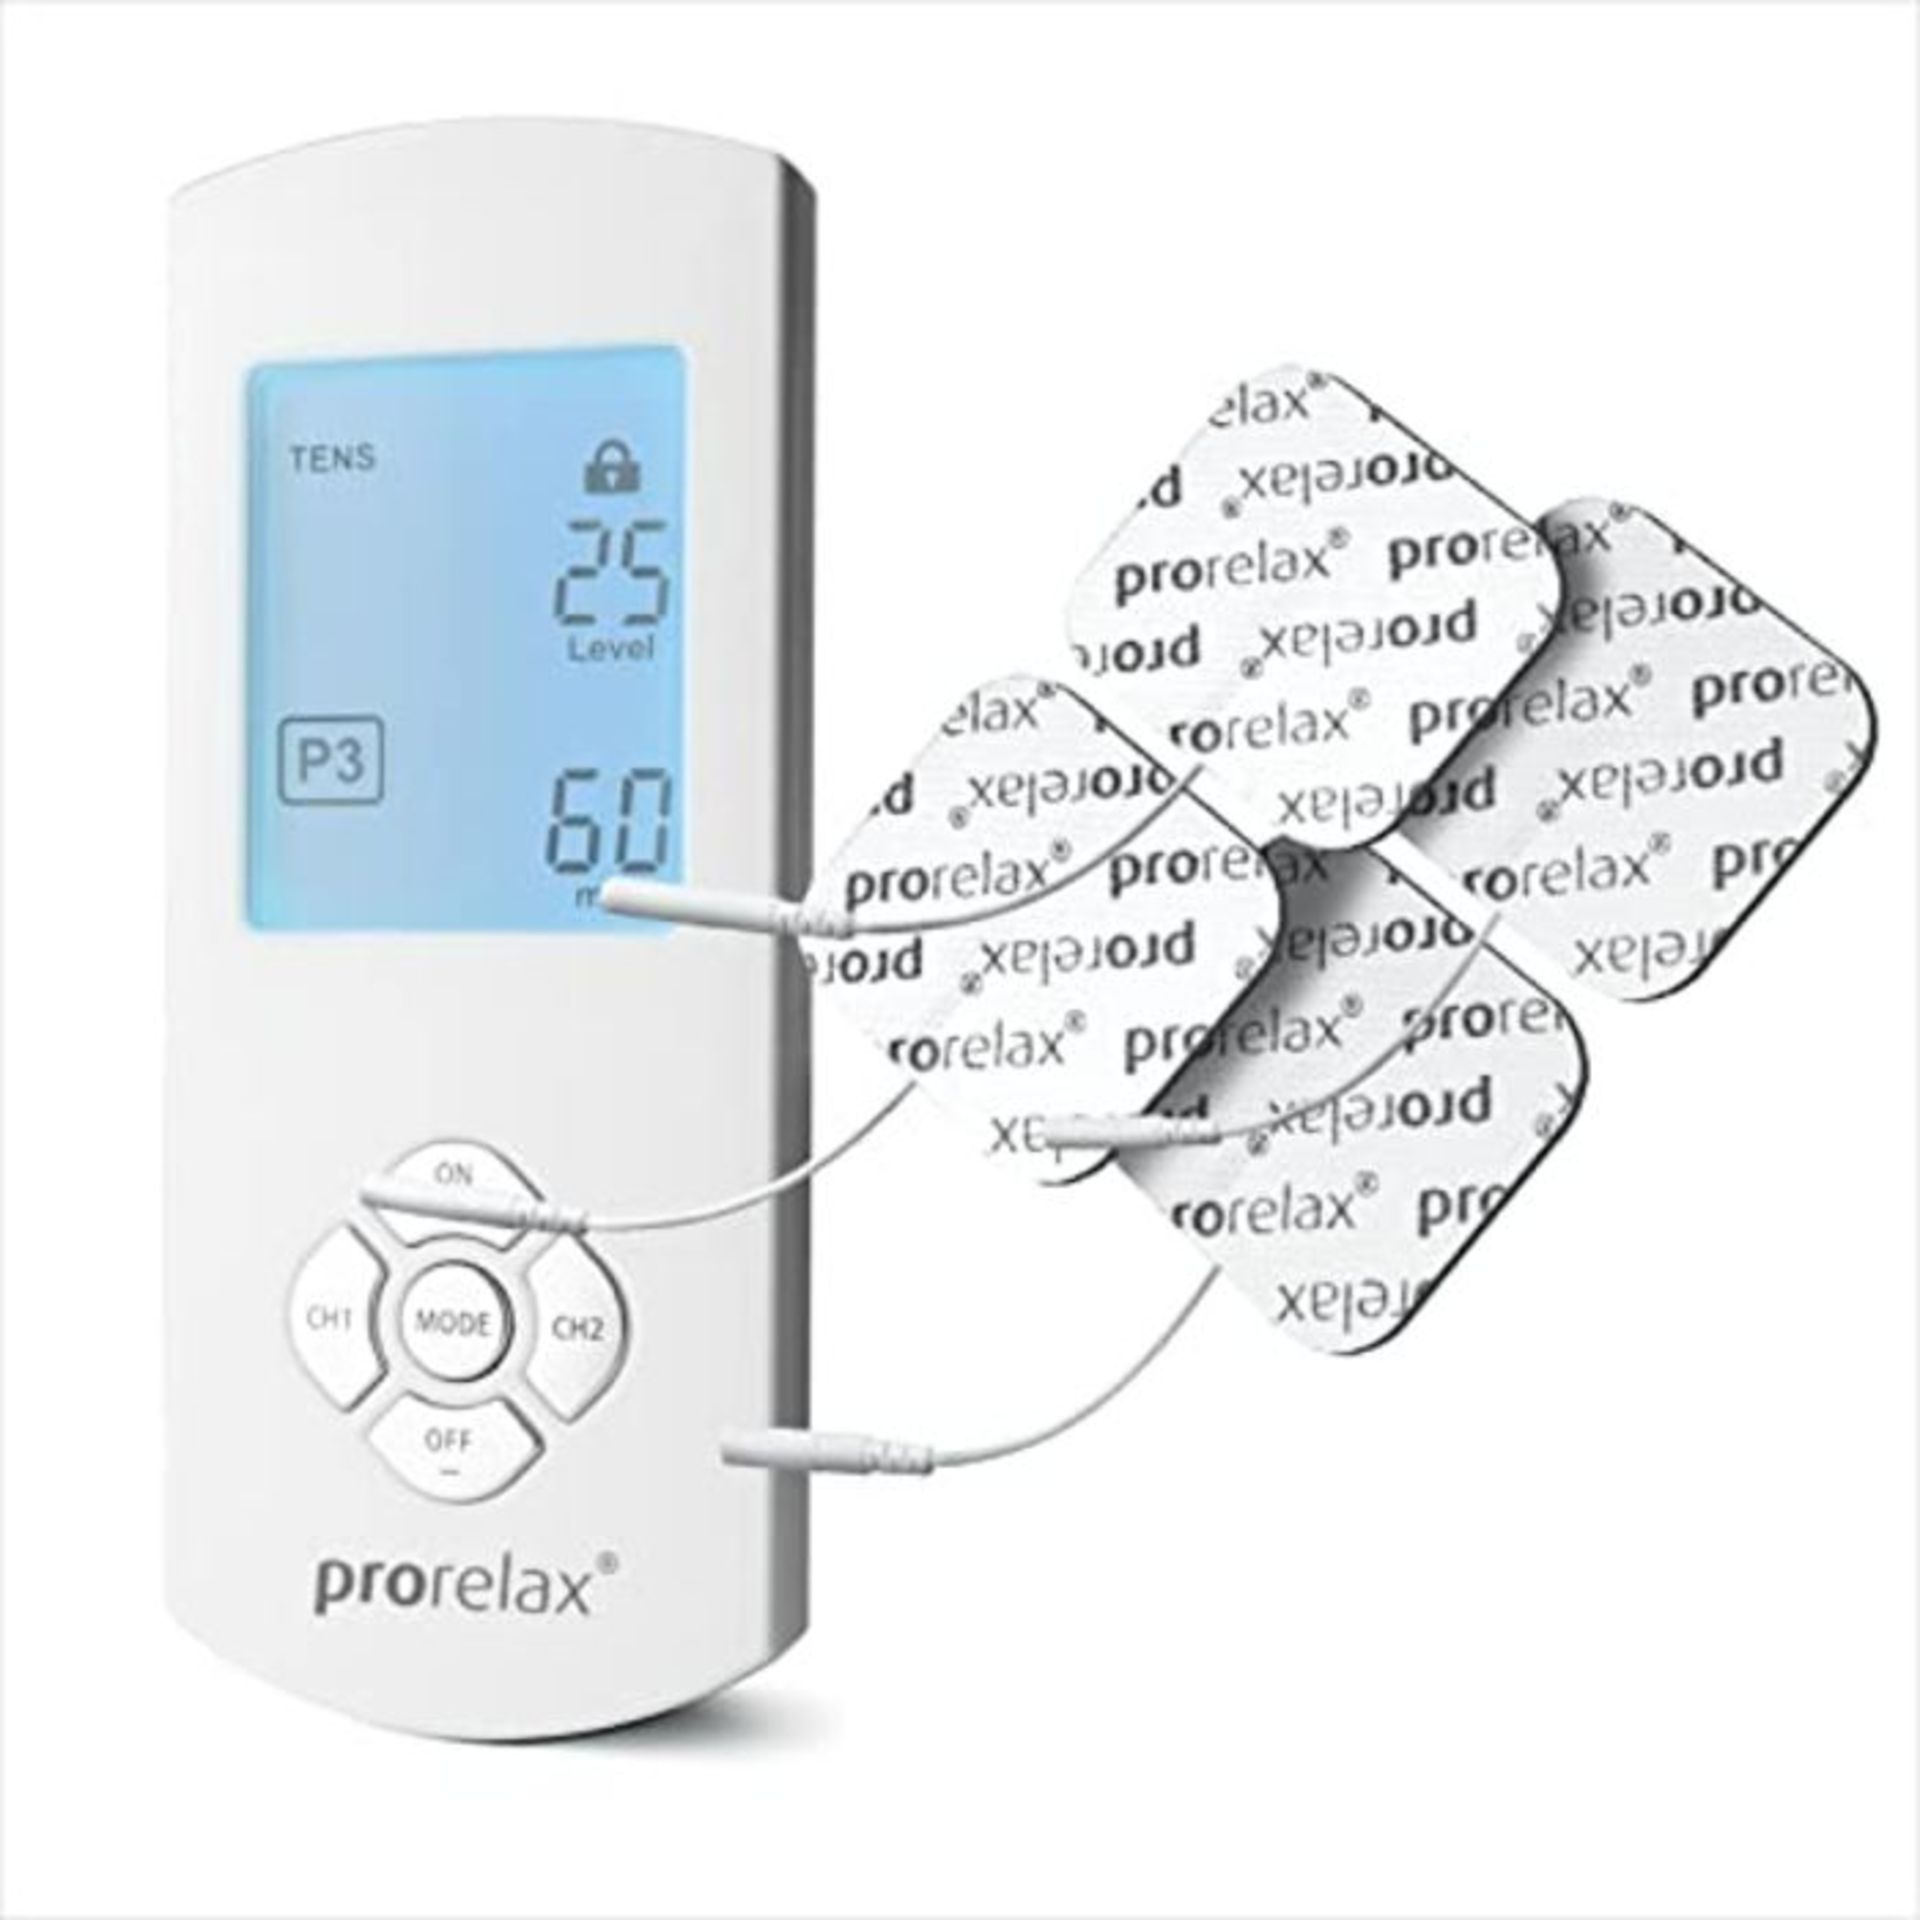 prorelax TENS/EMS Duo Comfort | electrostimulation device | 2 therapies with one devic